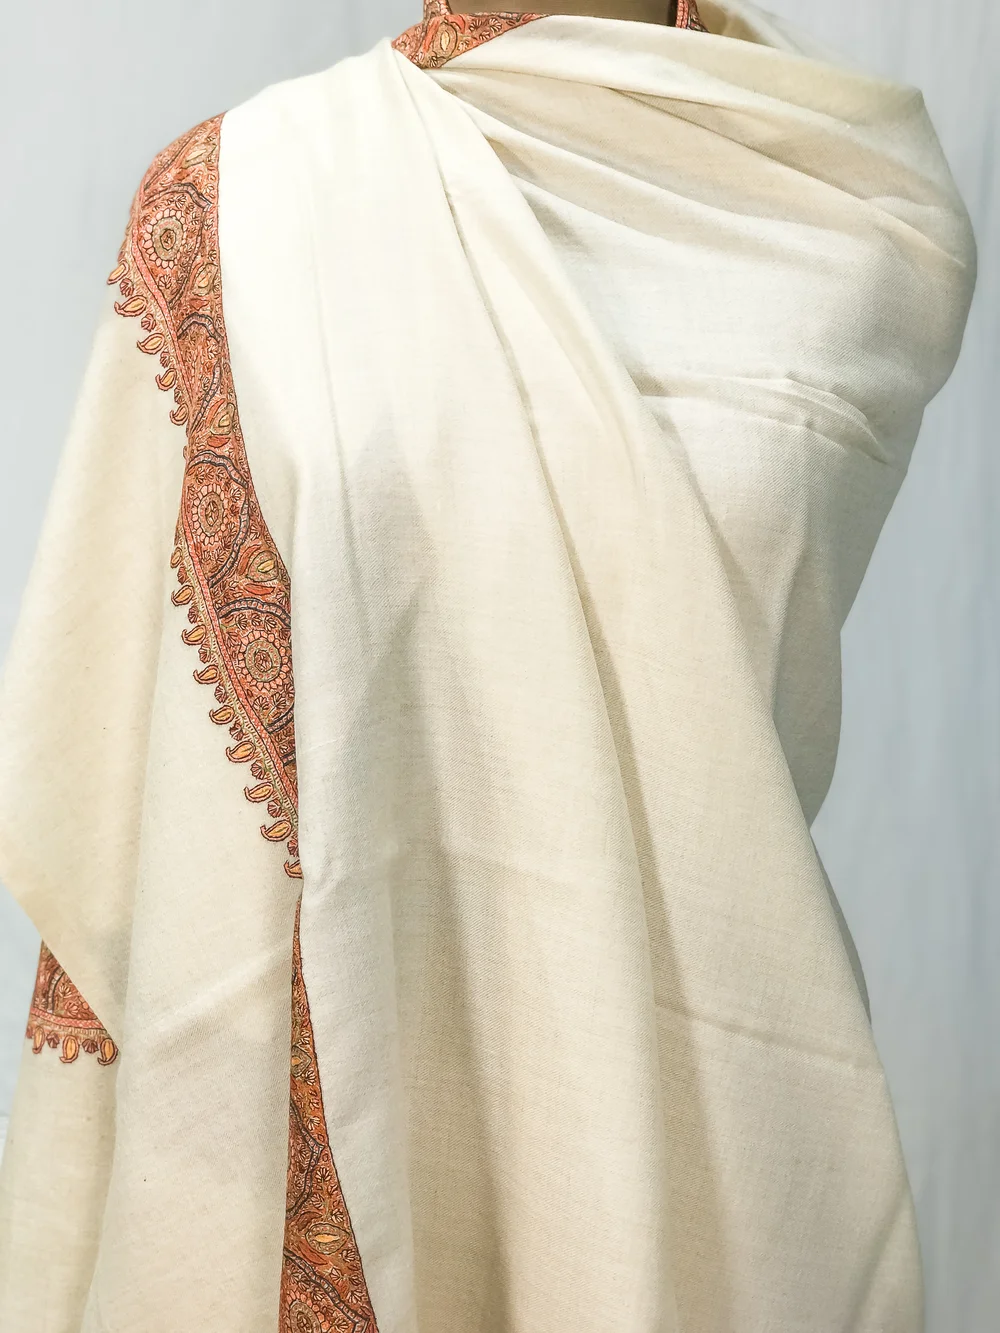 Off-White Pure Pashmina Shawl With Intricate Sozni hand Embroidery front